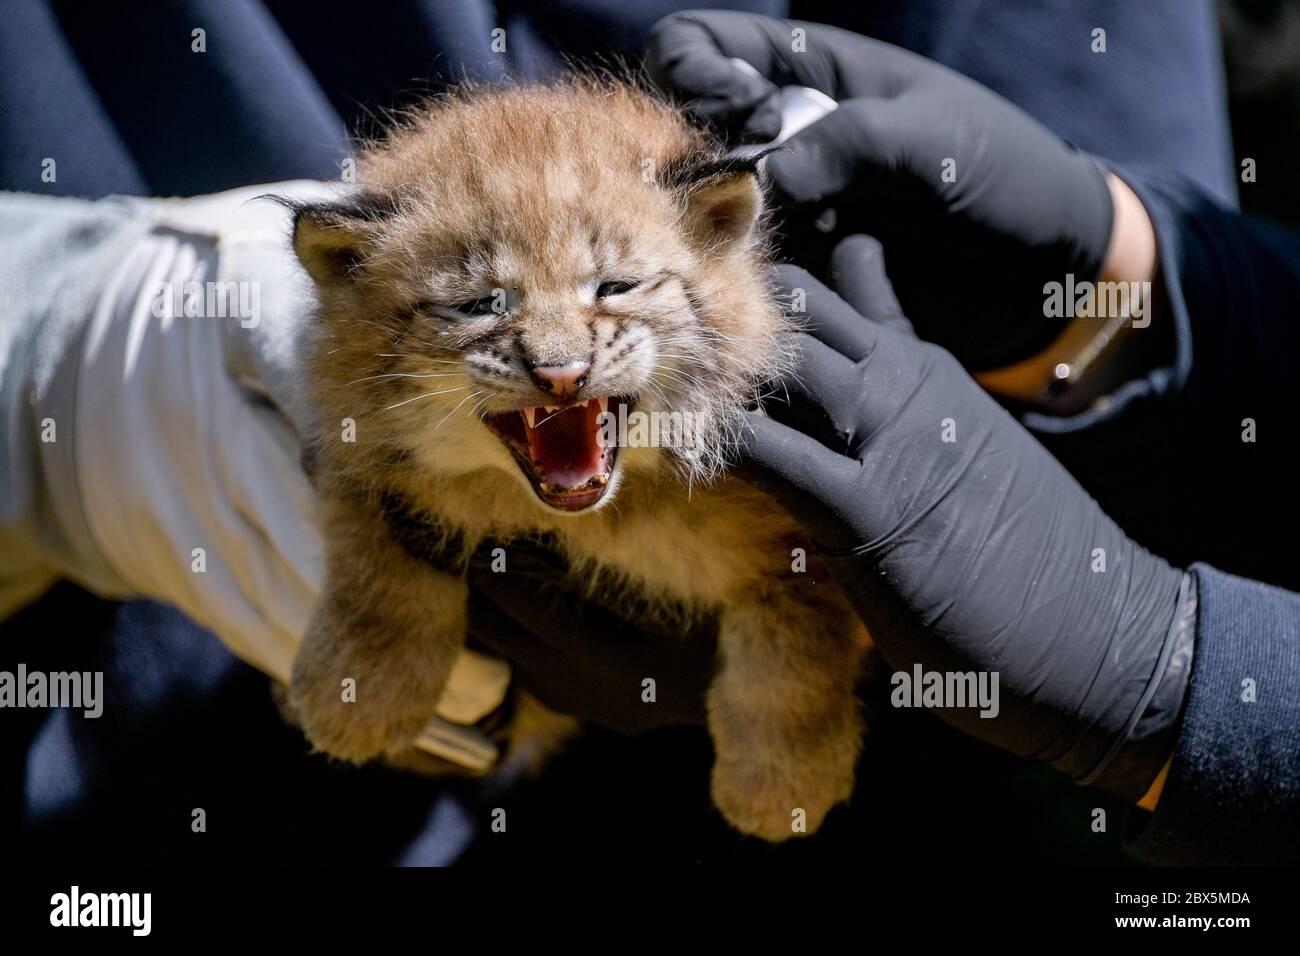 Hamburg, Germany. 05th June, 2020. An animal keeper holds one of three newborn lynxes in the Black Mountains Wildlife Park in his arms. After an initial examination by the vet, one of the animals was baptized "Rocky" by godfather and ex-footballer Frings and his son. Credit: Axel Heimken/dpa/Alamy Live News Stock Photo